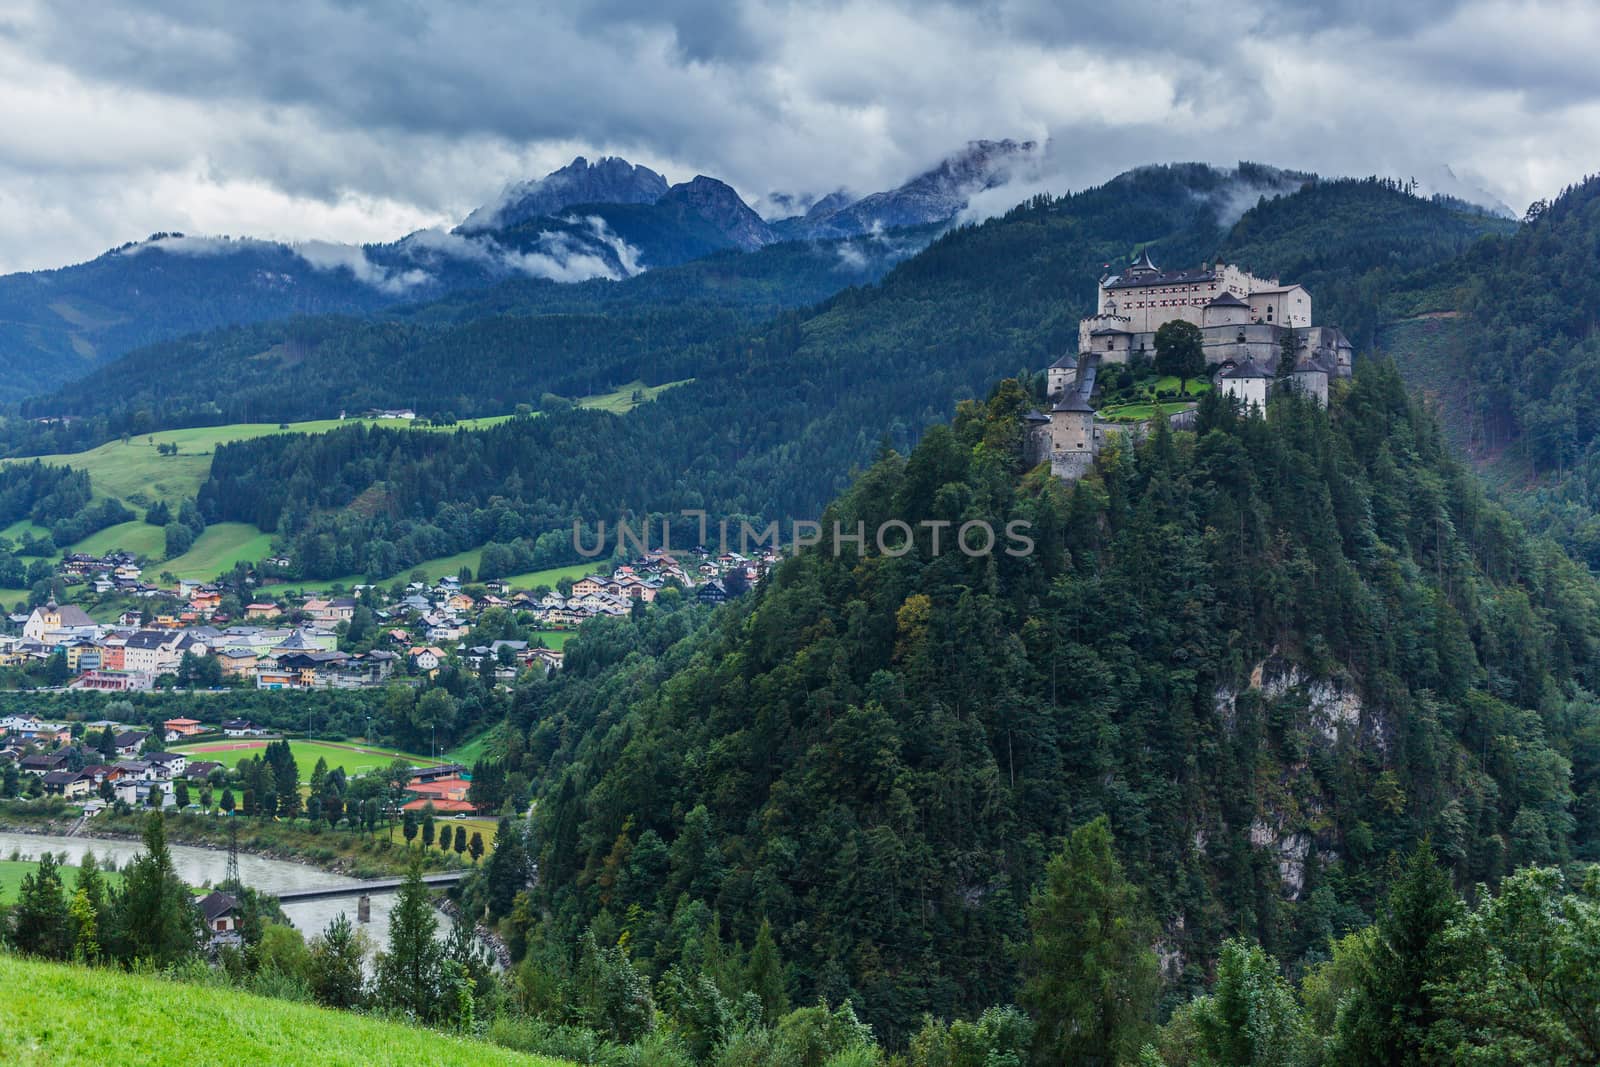 Castle Hohenwerfen by Salzburg on a misty mountain in the Alps